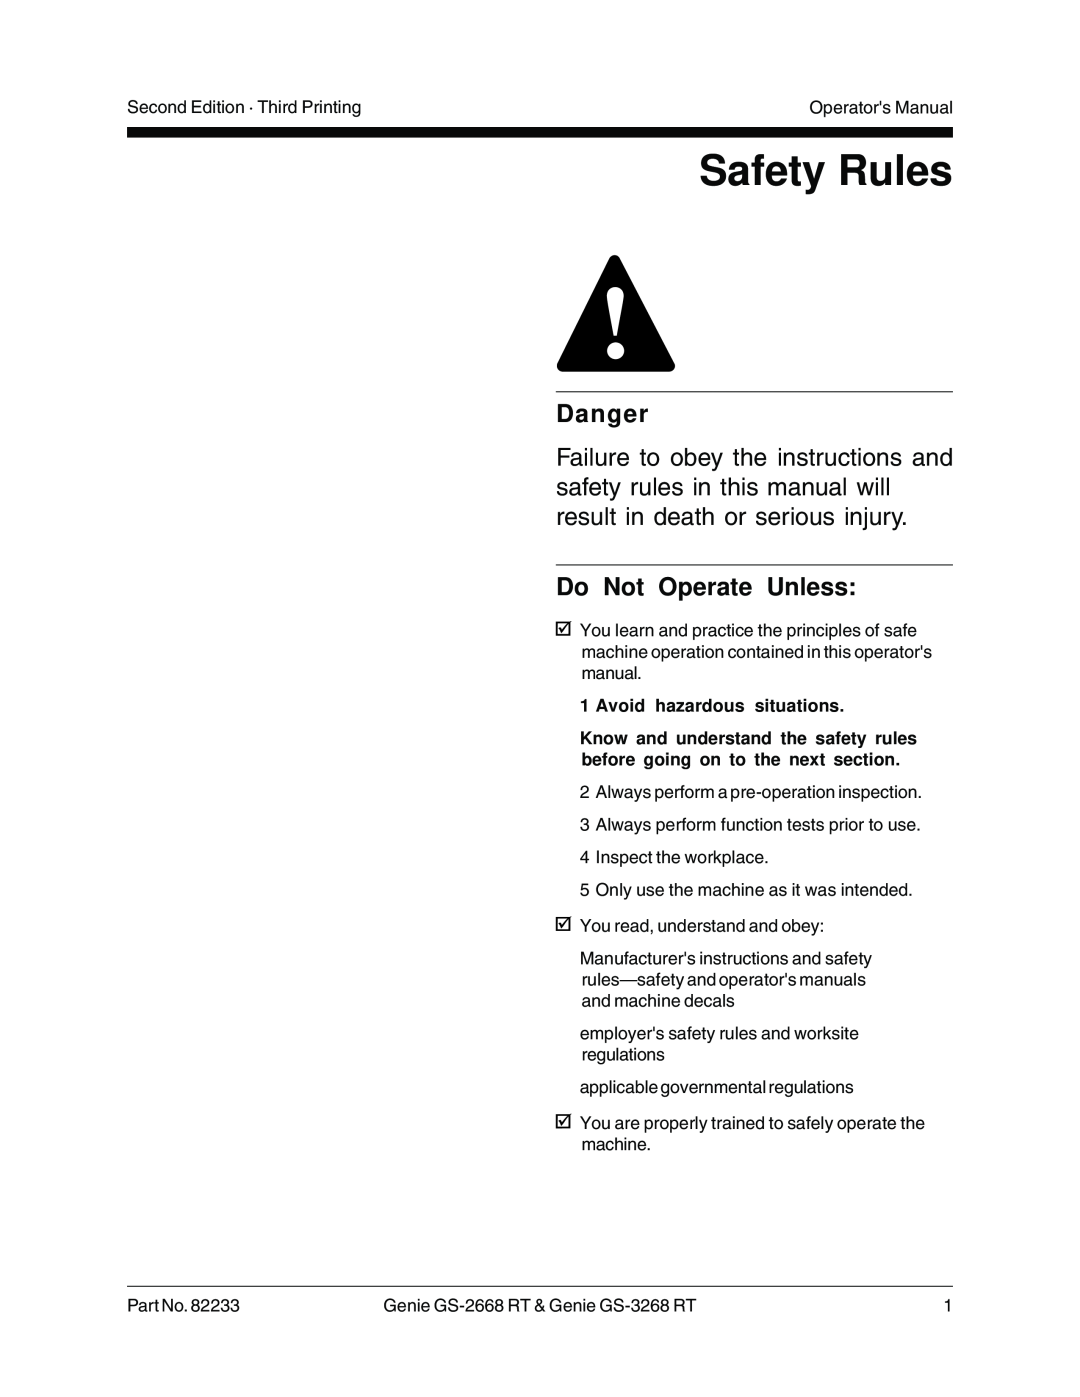 Genie GS-3268 RT, GS-2668 RT manual Safety Rules, Danger, Do Not Operate Unless, Avoid hazardous situations 